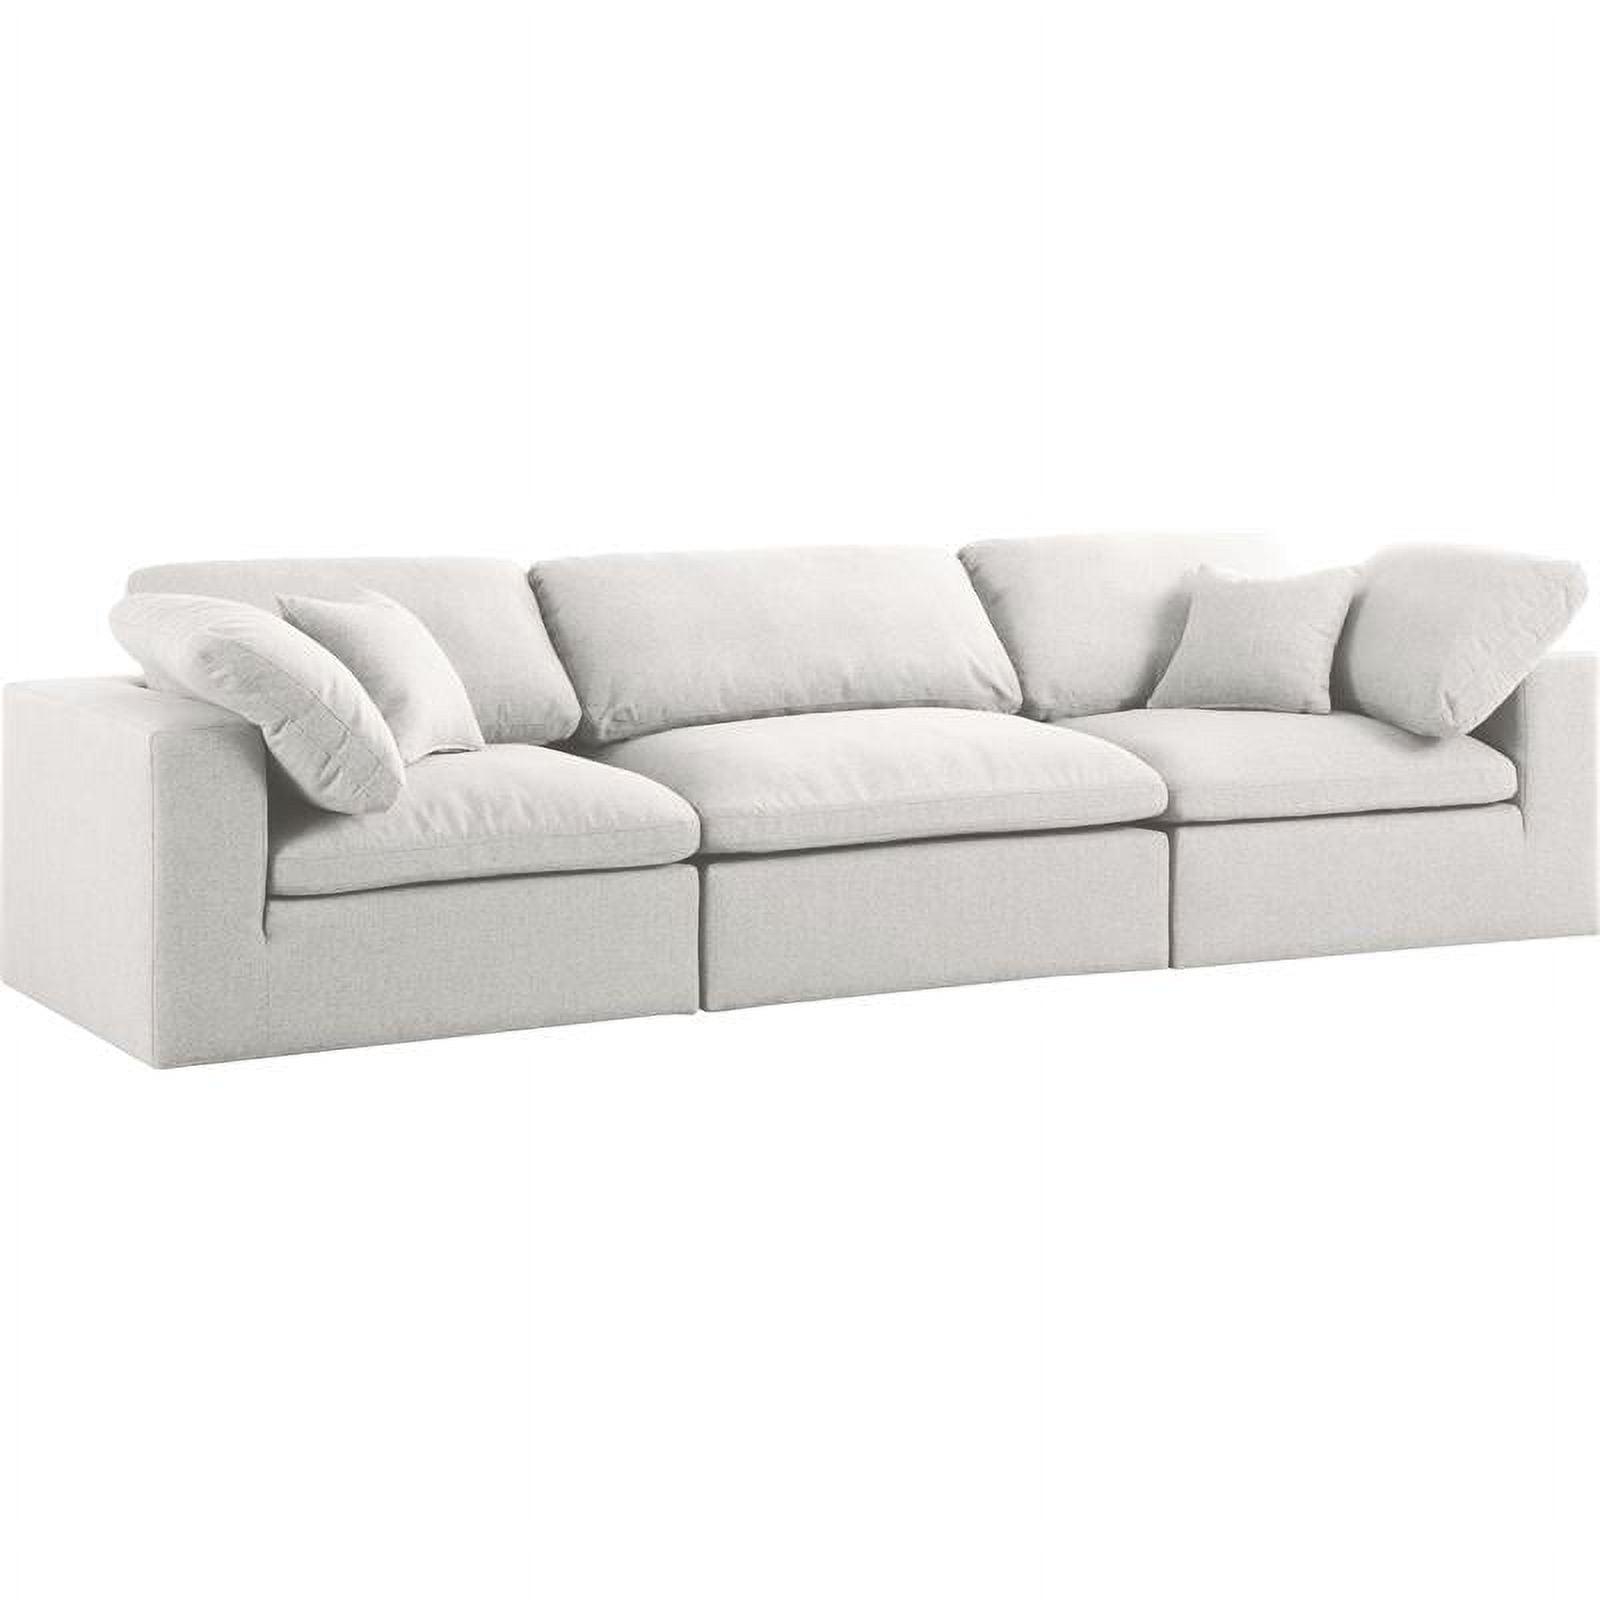 Serene Cream Linen and Solid Wood Deluxe Modular Sofa with Down Fill Cushions